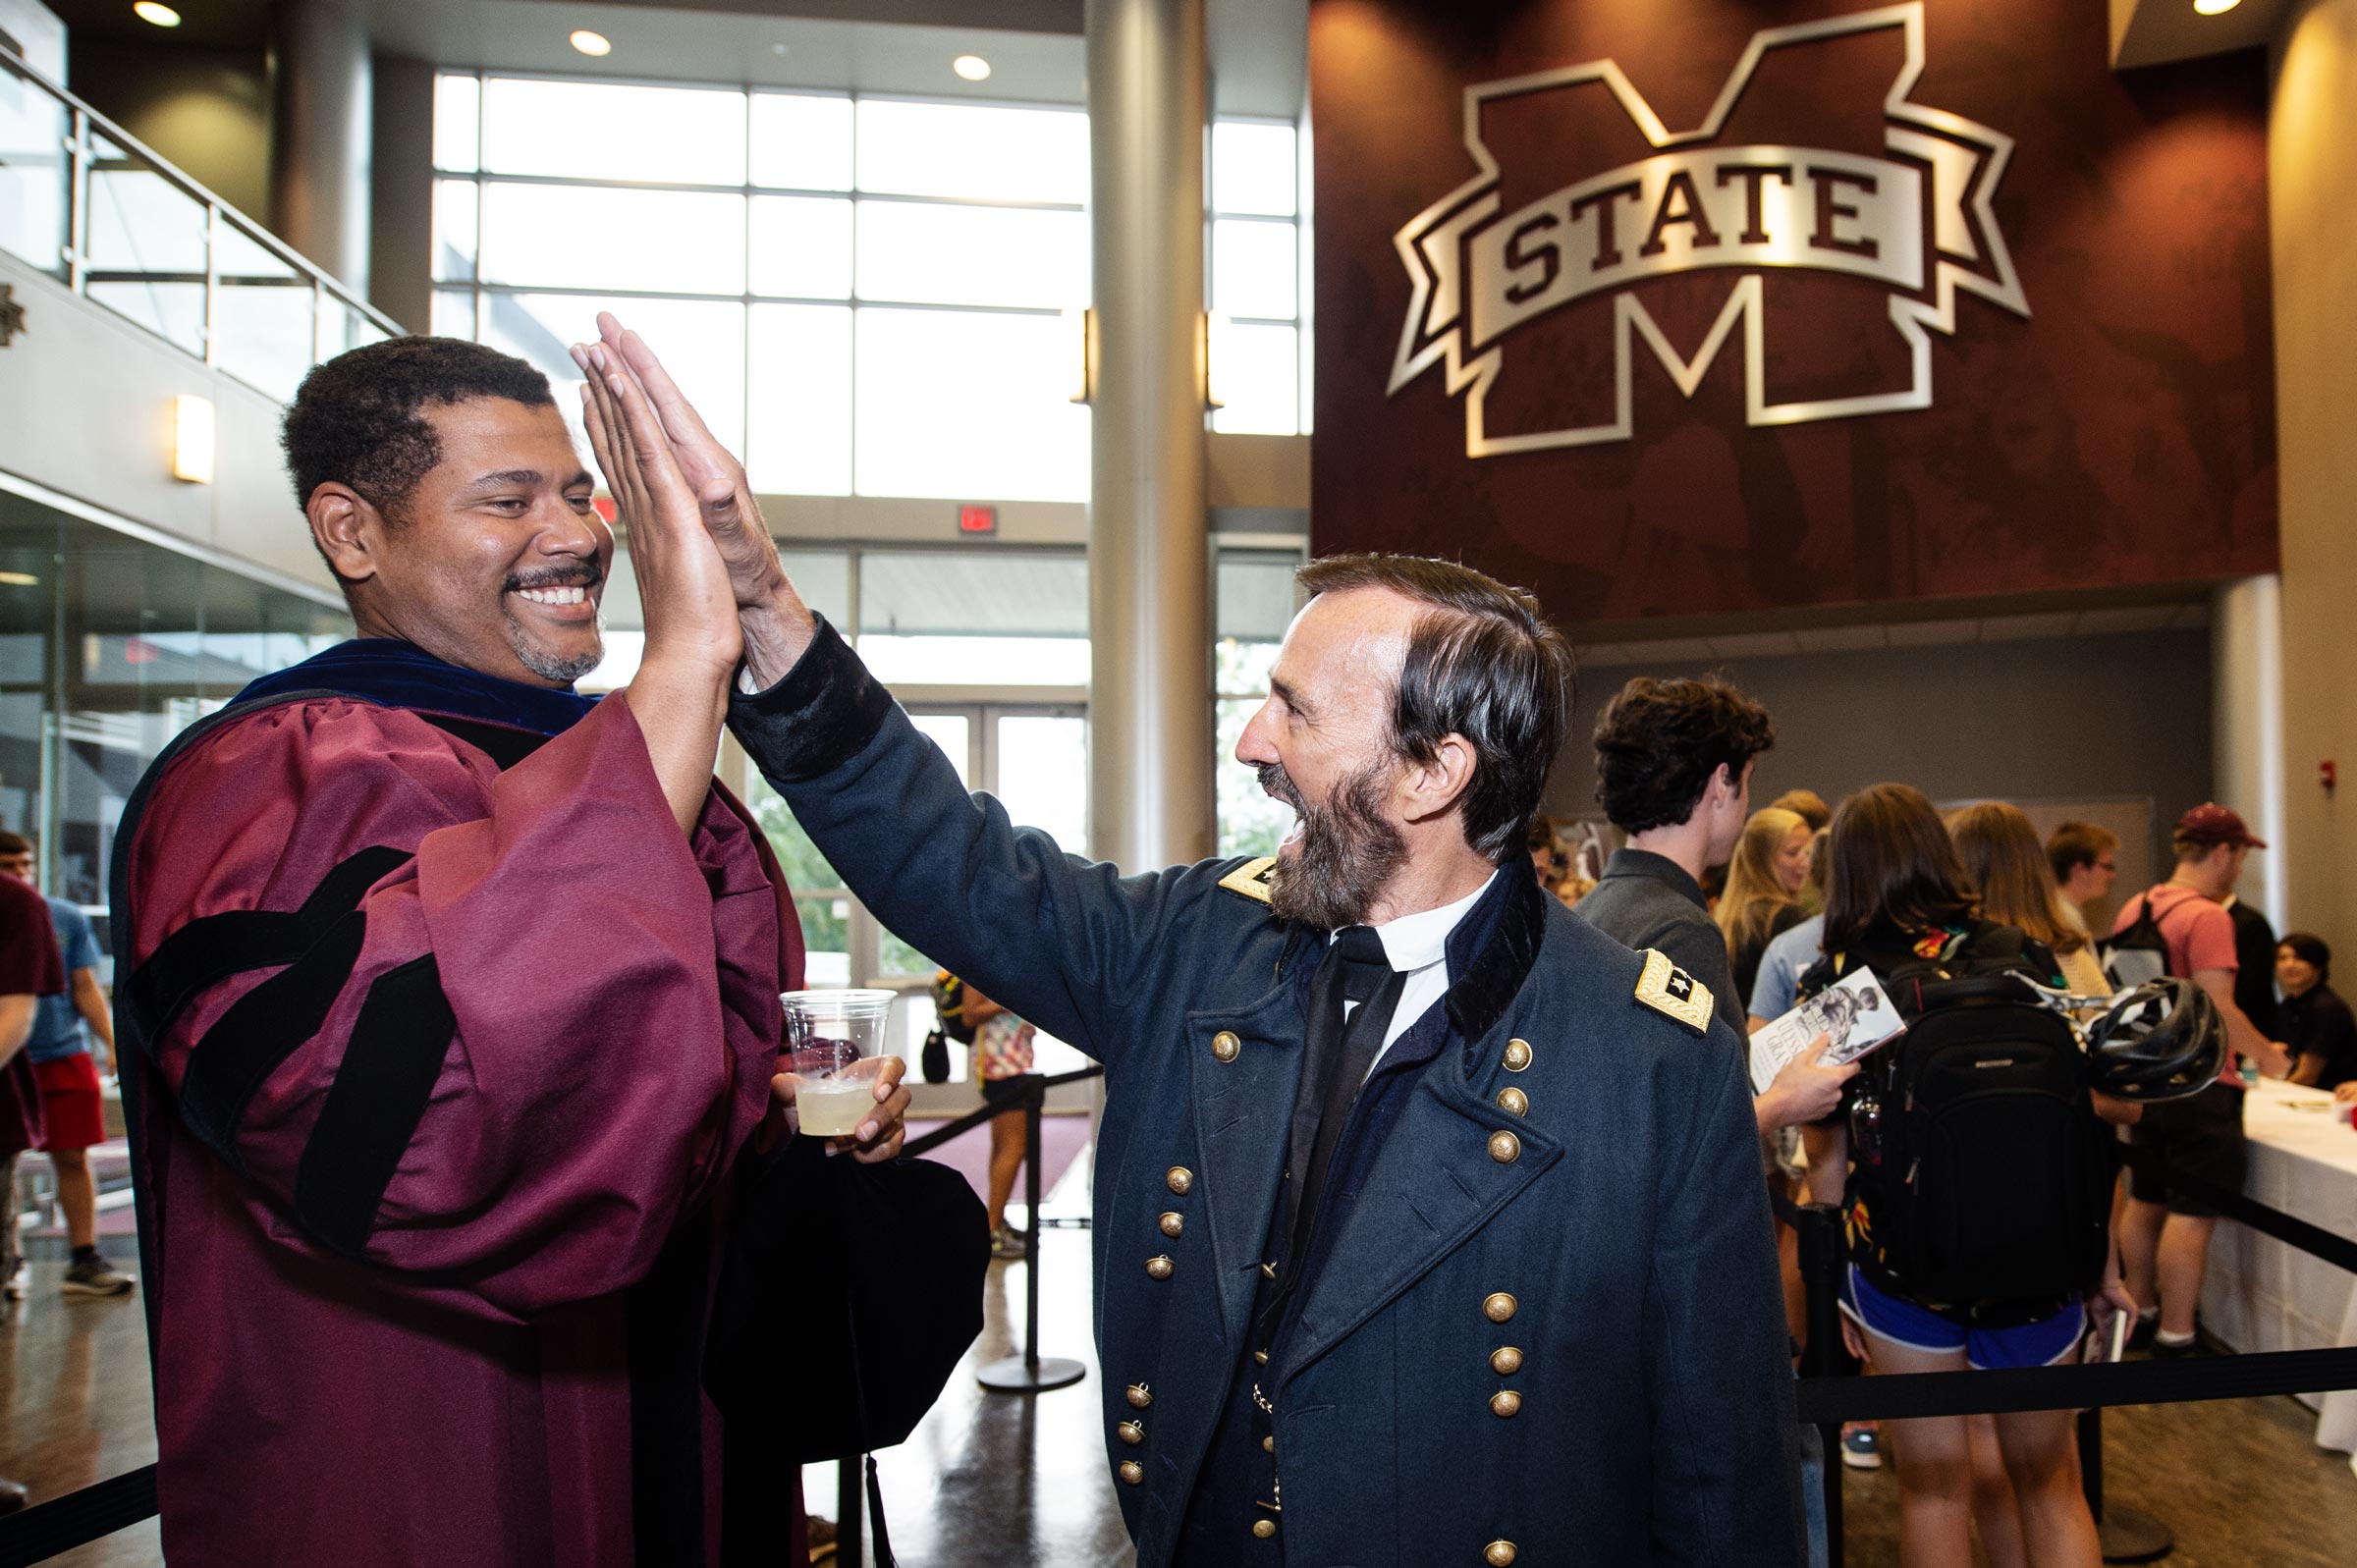 Ulysses S. Grant high-fives Professor Donald Shaffer following the Convocation ceremony in Humphrey Coliseum.